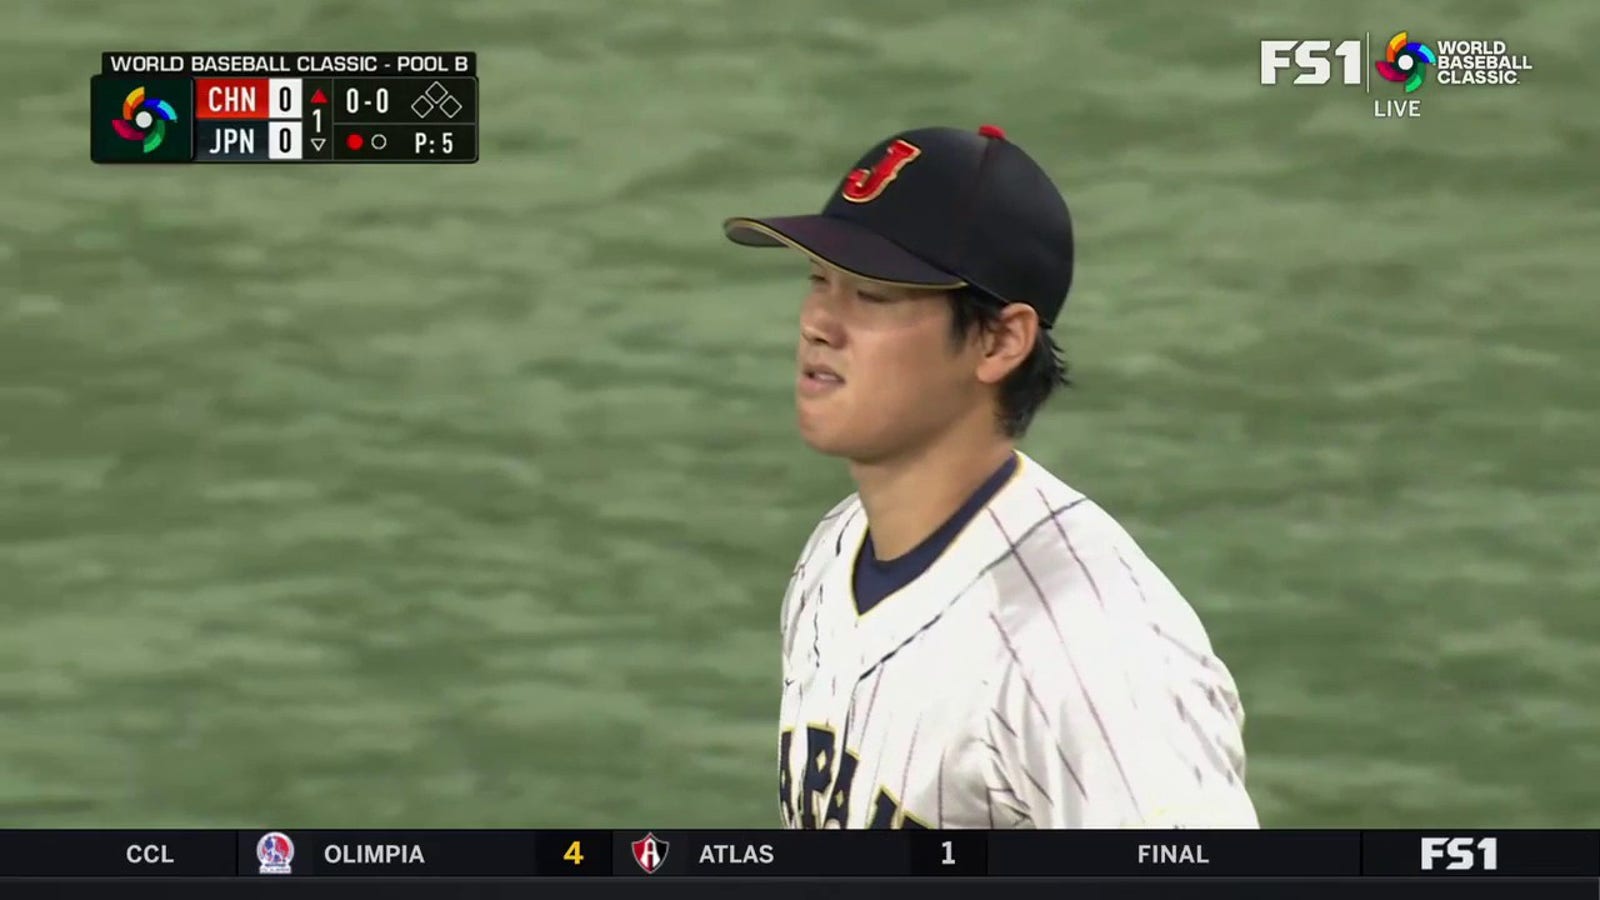 Japan's Shohei Ohtani records his first shutout of the 2023 World Baseball Classic against China!